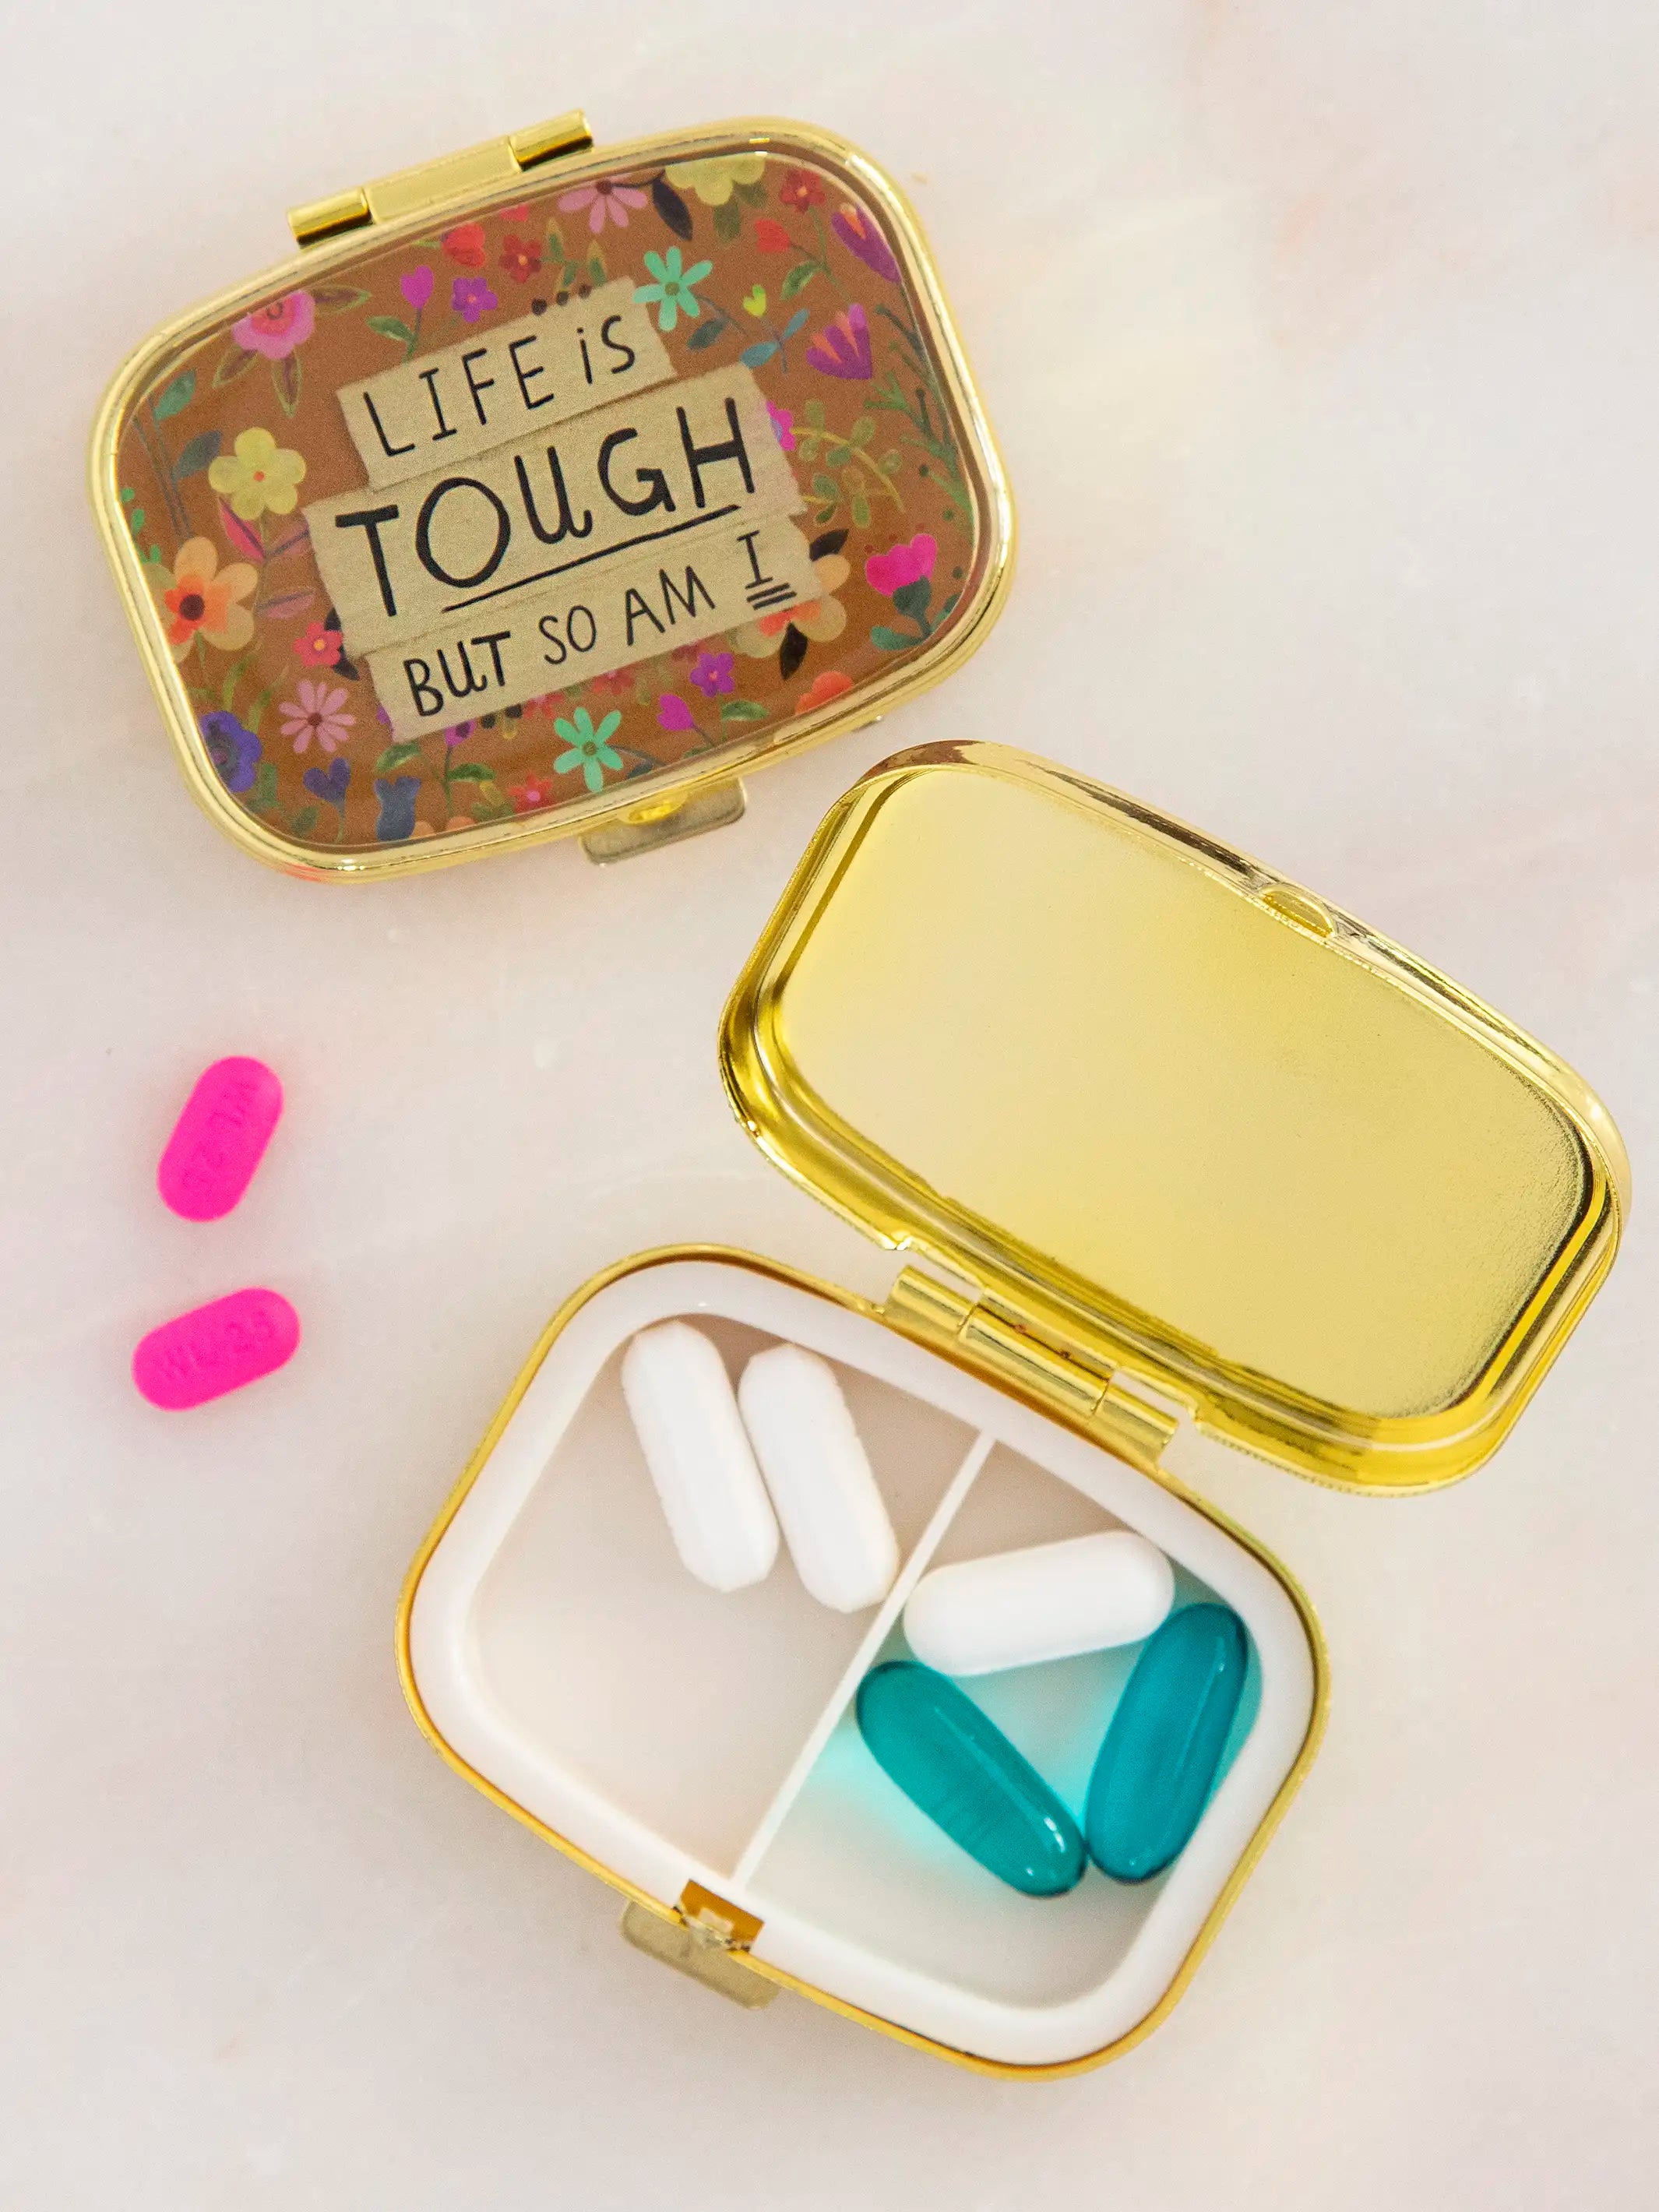 Natural Life Pill Holder - Life is Tough But So Am I